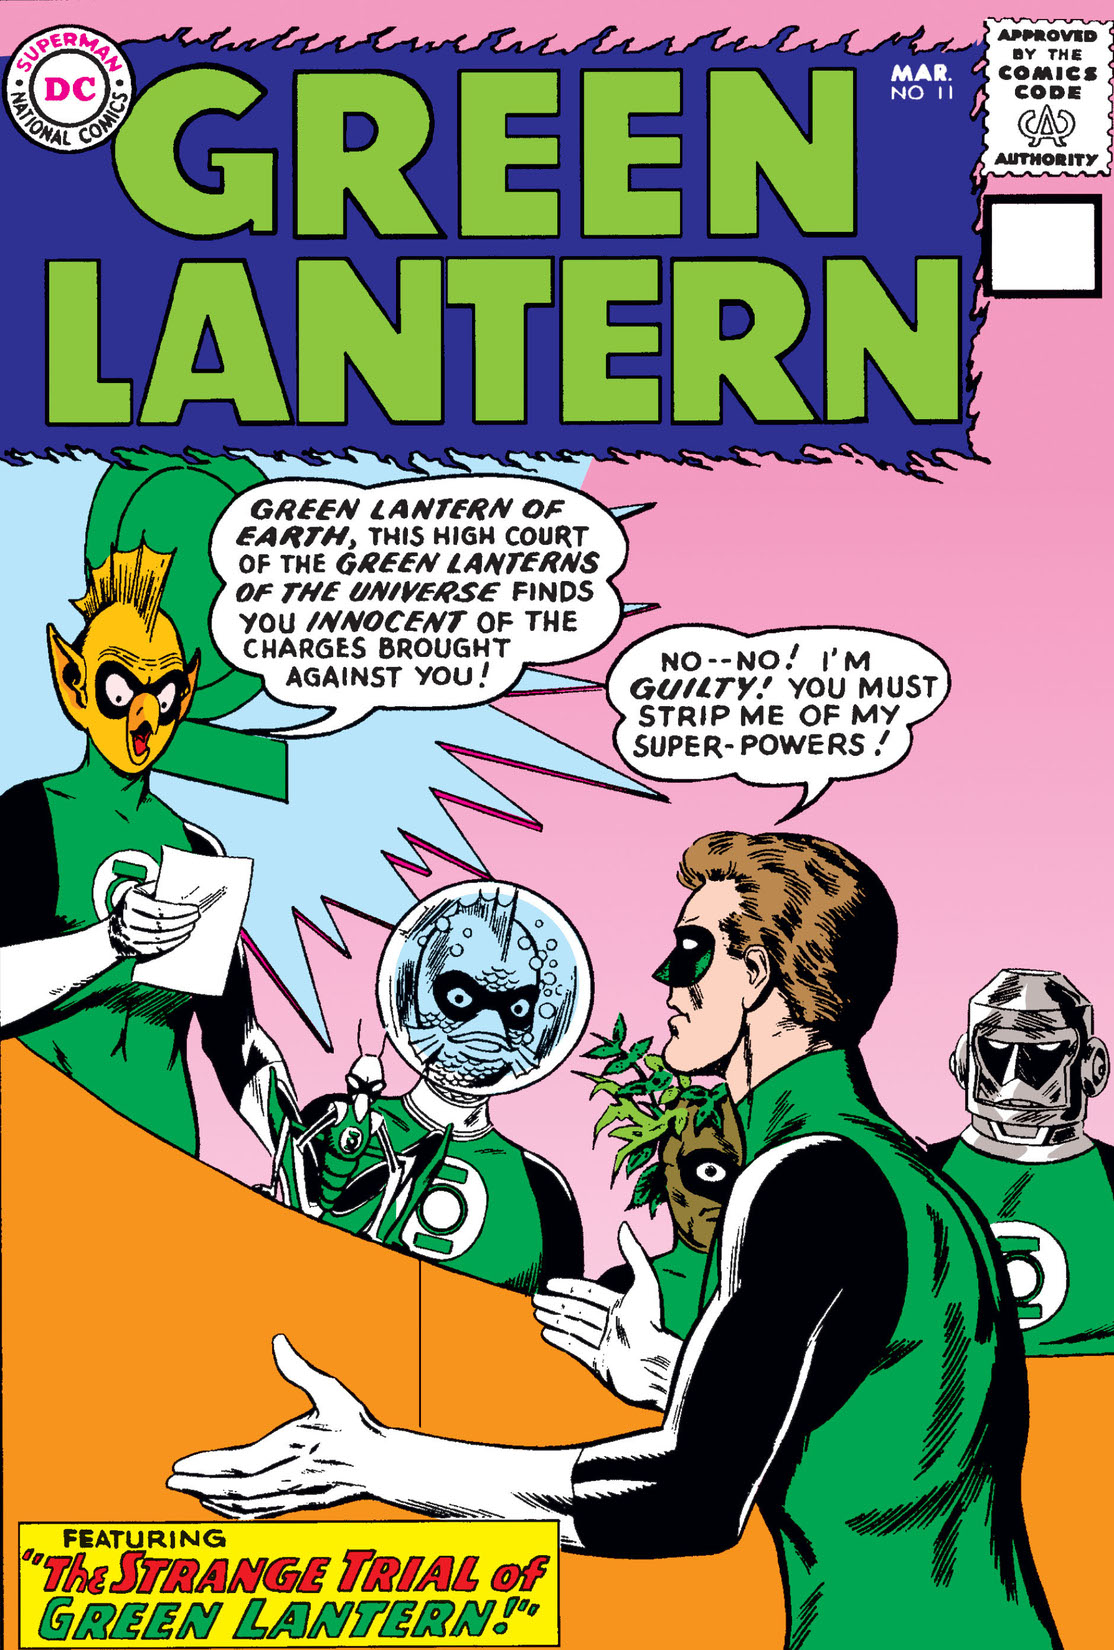 Green Lantern (1960-) #11 preview images